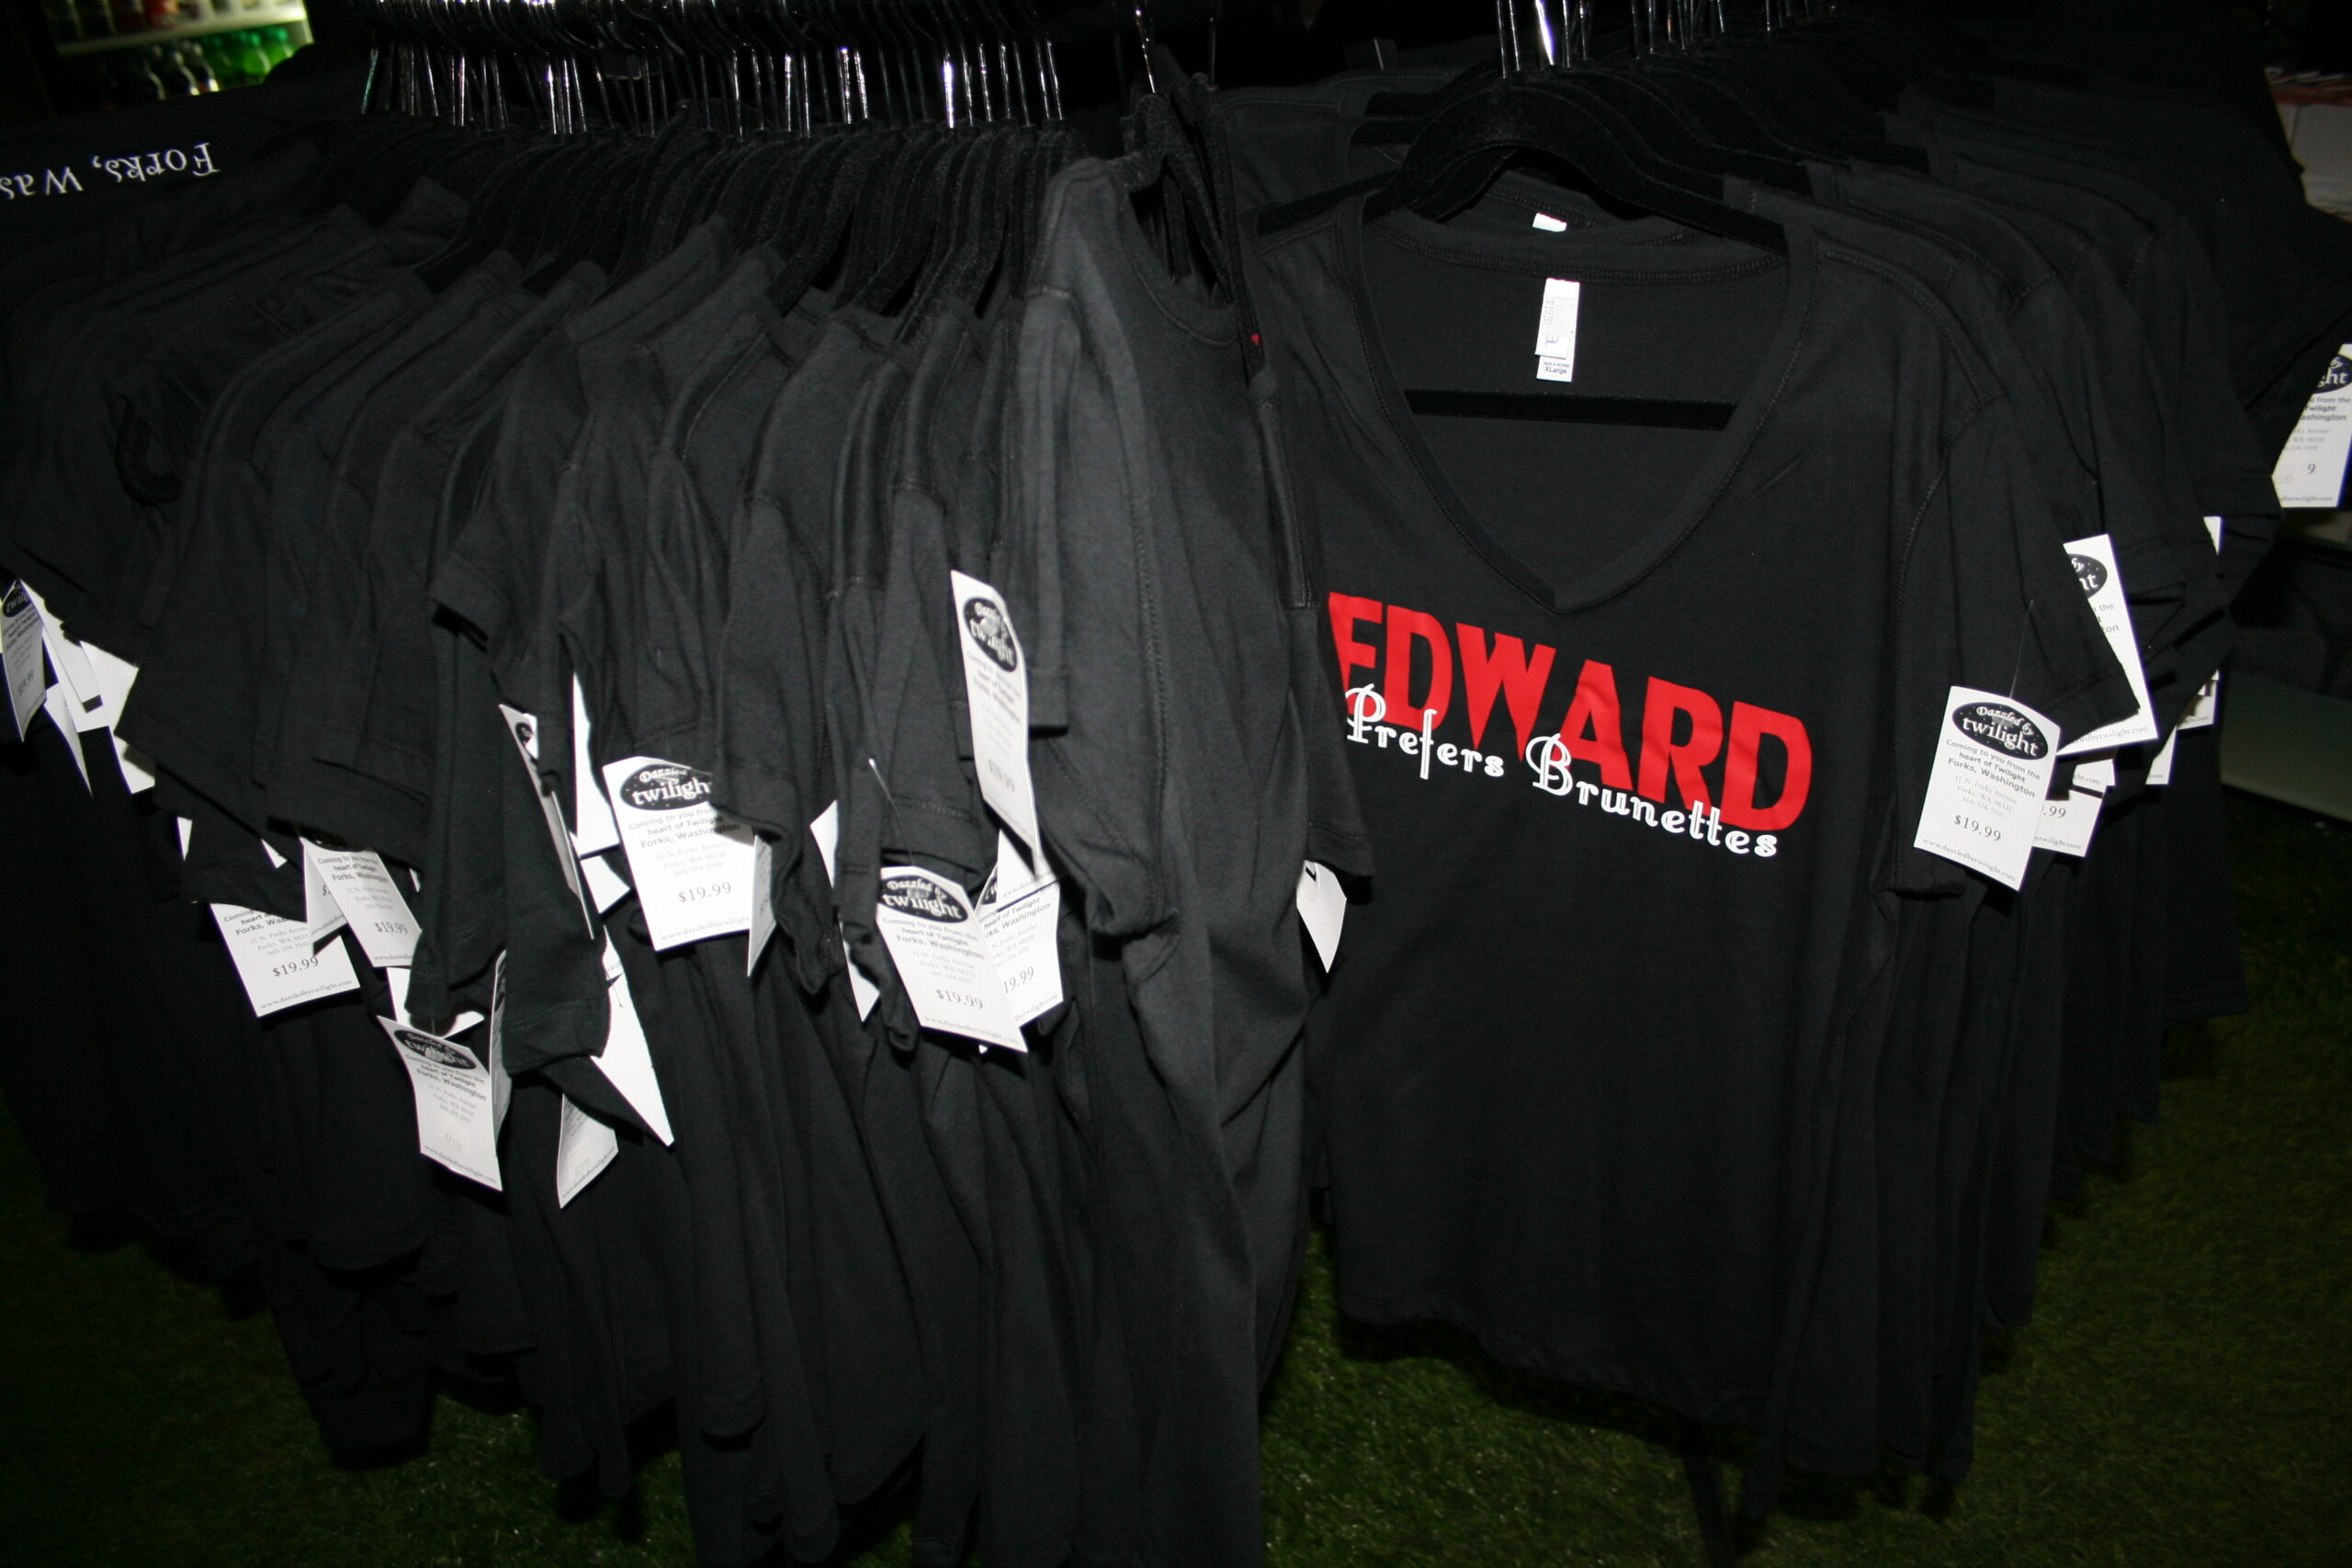 Souvenir T-shirts hang in the Dazzled by Twilight store in Forks, Washington.